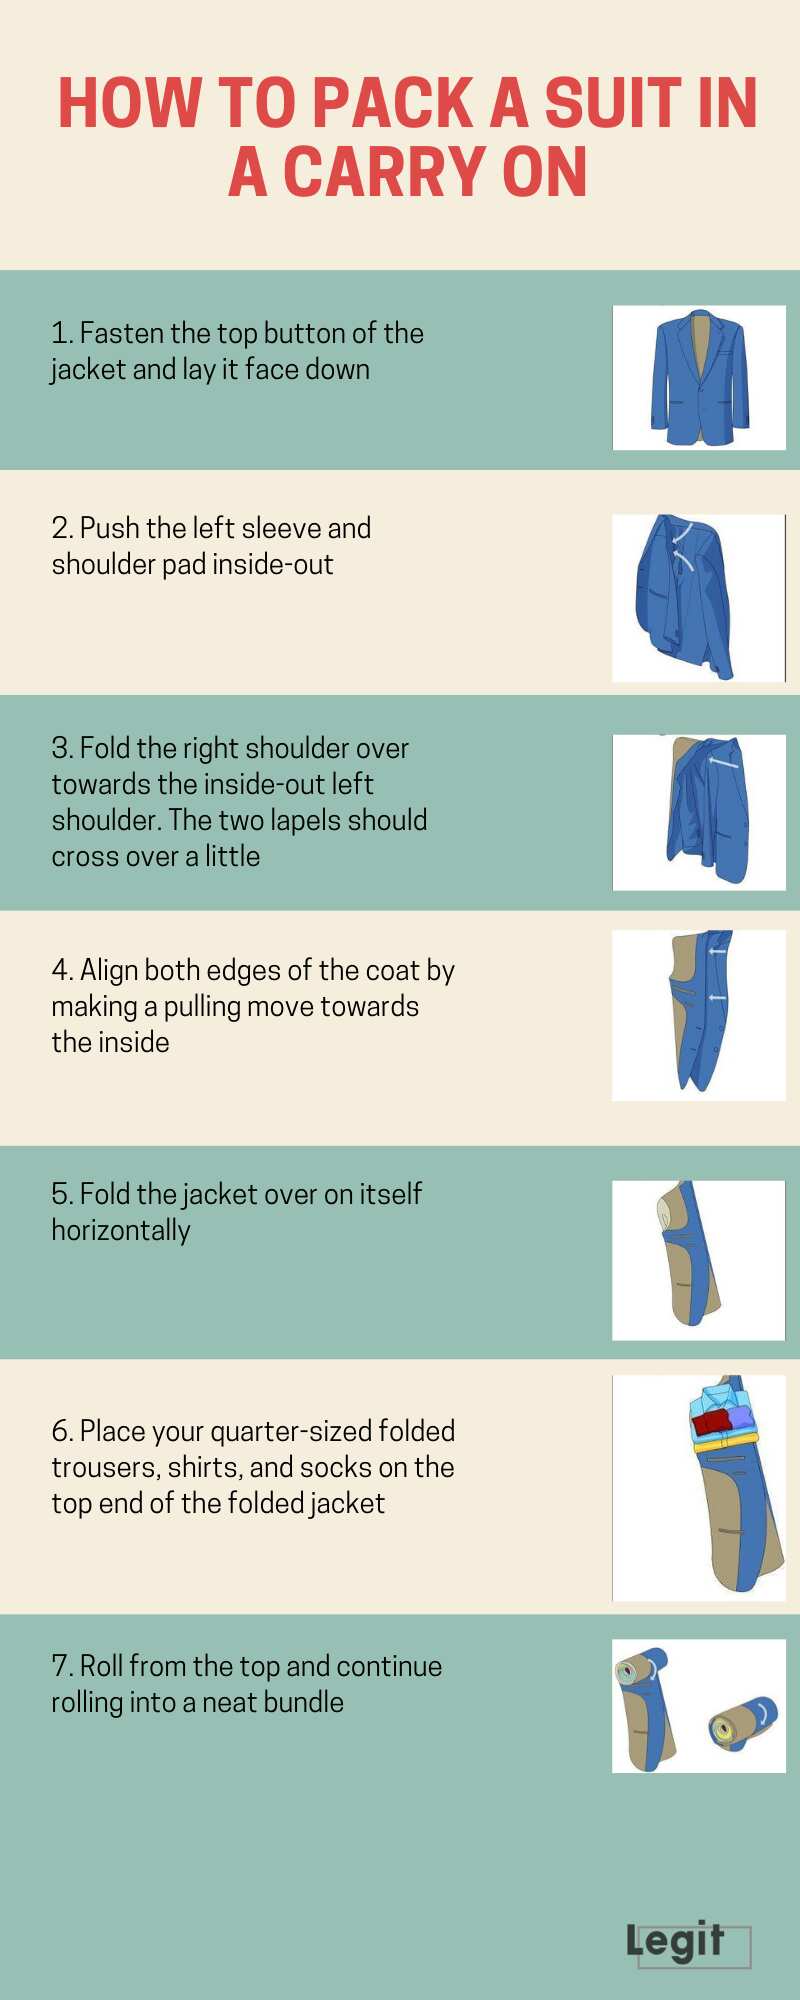 How to pack a suit